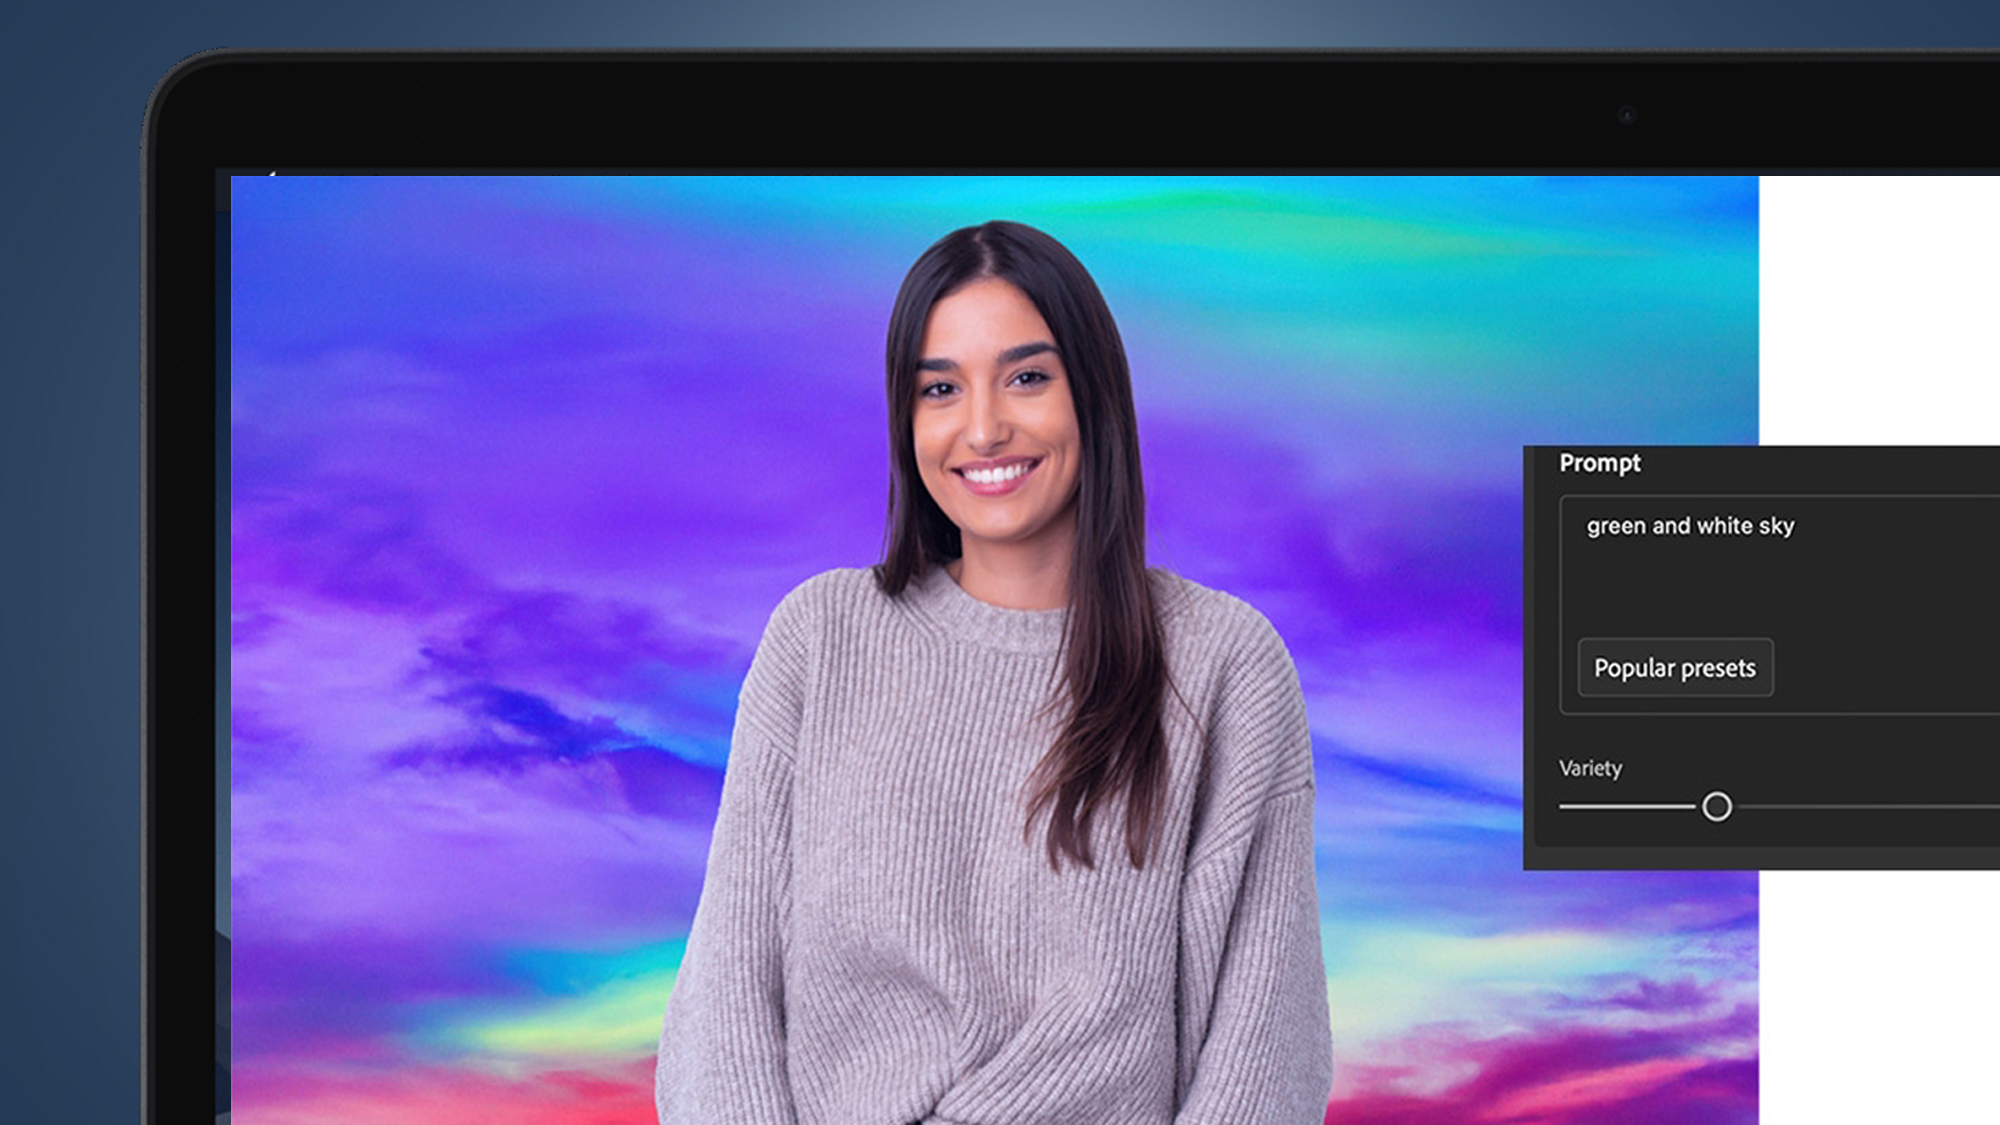 A woman smiling in front of a multi-colored backdrop